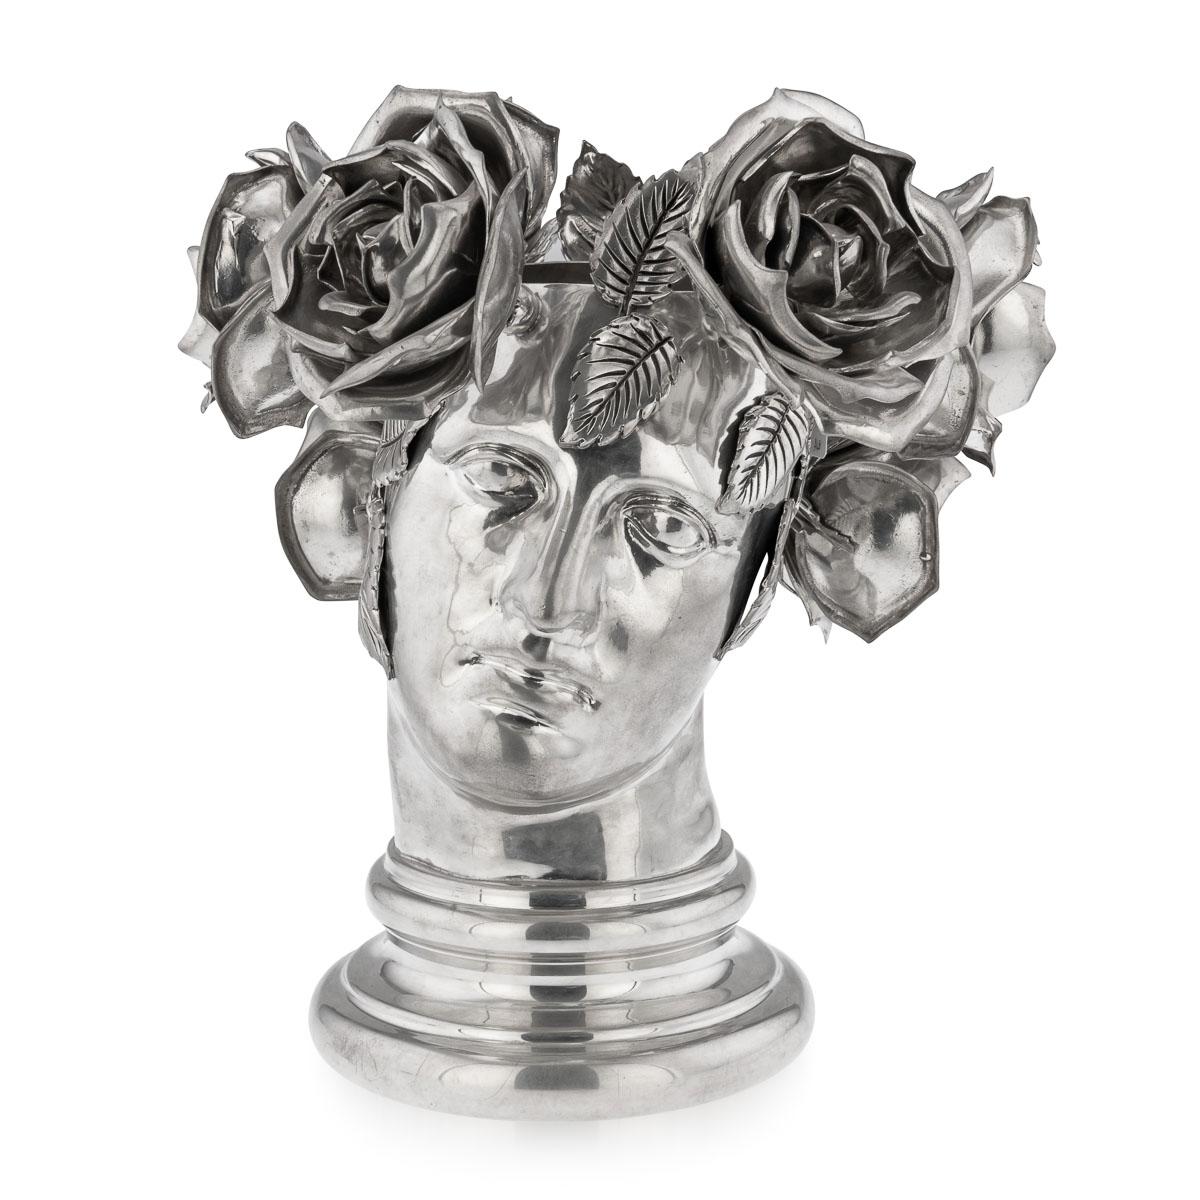 This wine cooler is a rare opportunity to own one of his creations produced in the era of his collaboration with Atena, a pewter manufacturer of the highest level based in Brescia, northern Italy. An inclined female head with a crown of roses and